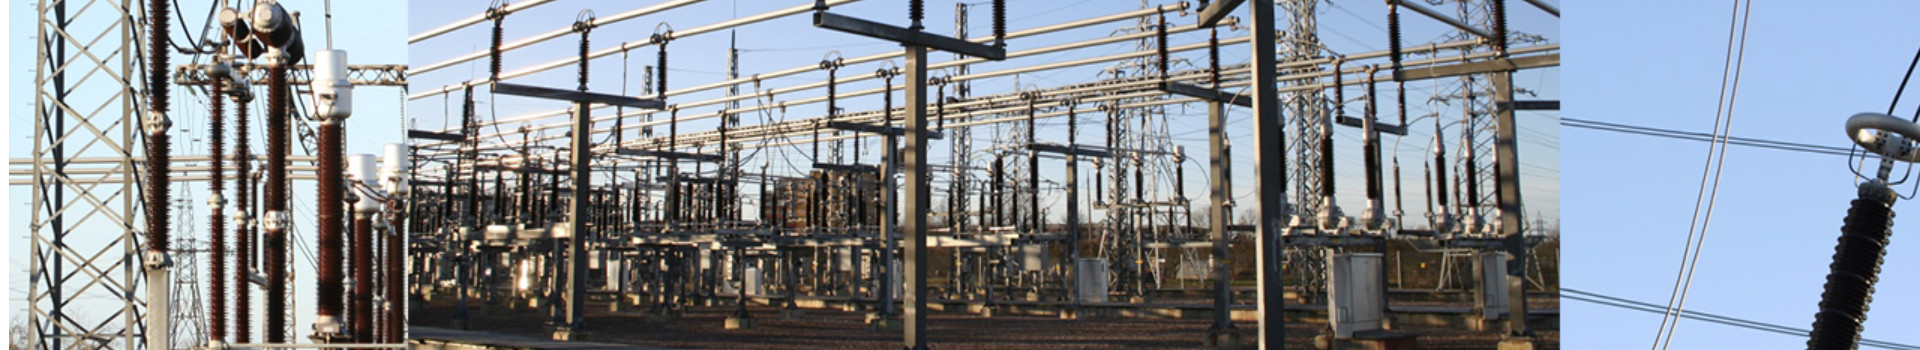 electrical installations construction, internal electrical installations, substations, cable lines, preventive care, additional care, modernisation, correctional care, maintenance of high voltage substations, Energy